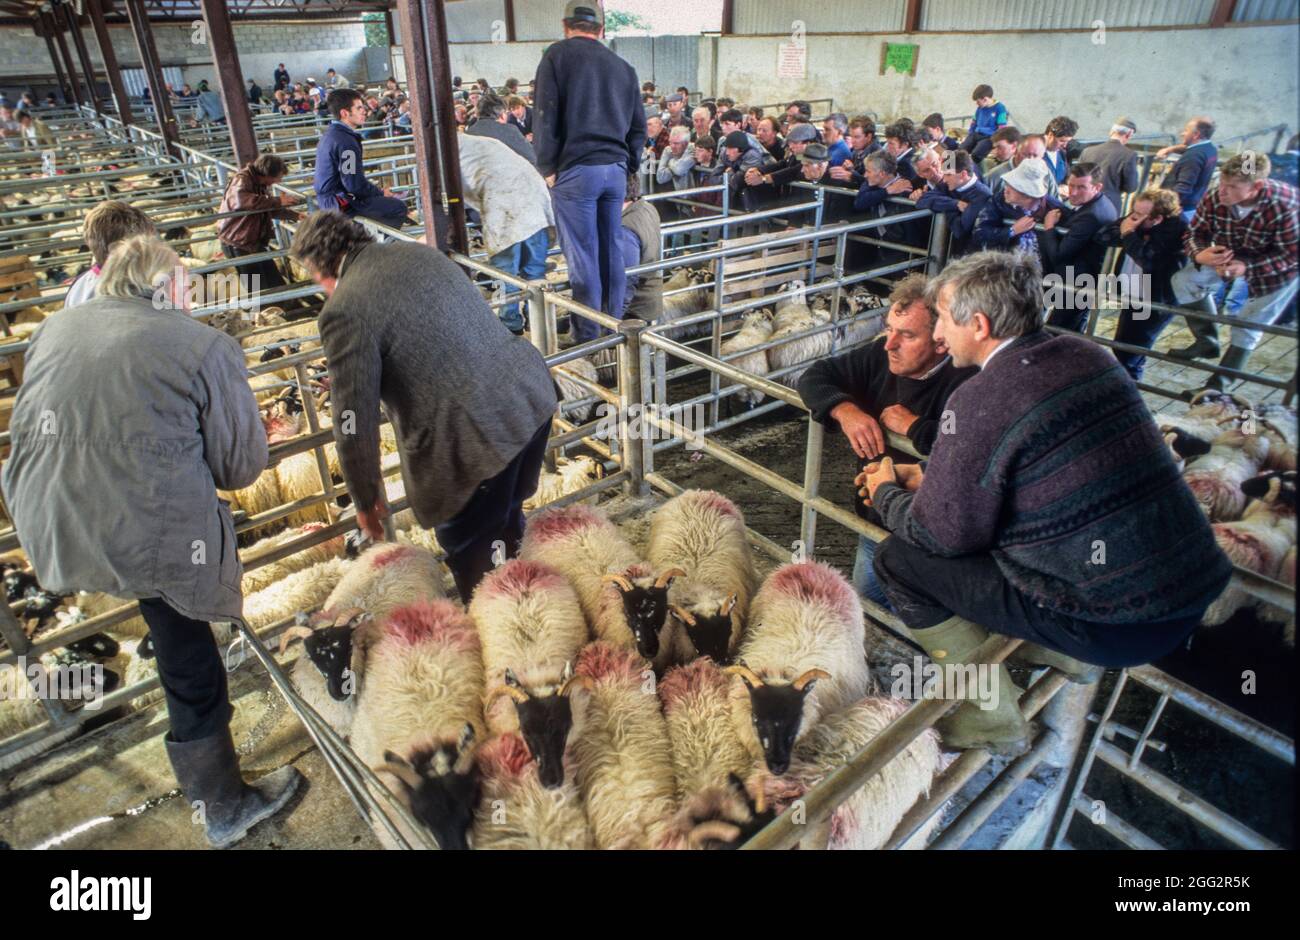 Shoptalk at the weekly sheep auction at Maam Cross Mart one of the most important spots for trading cattle, ponies, horses and sheep in the region Stock Photo